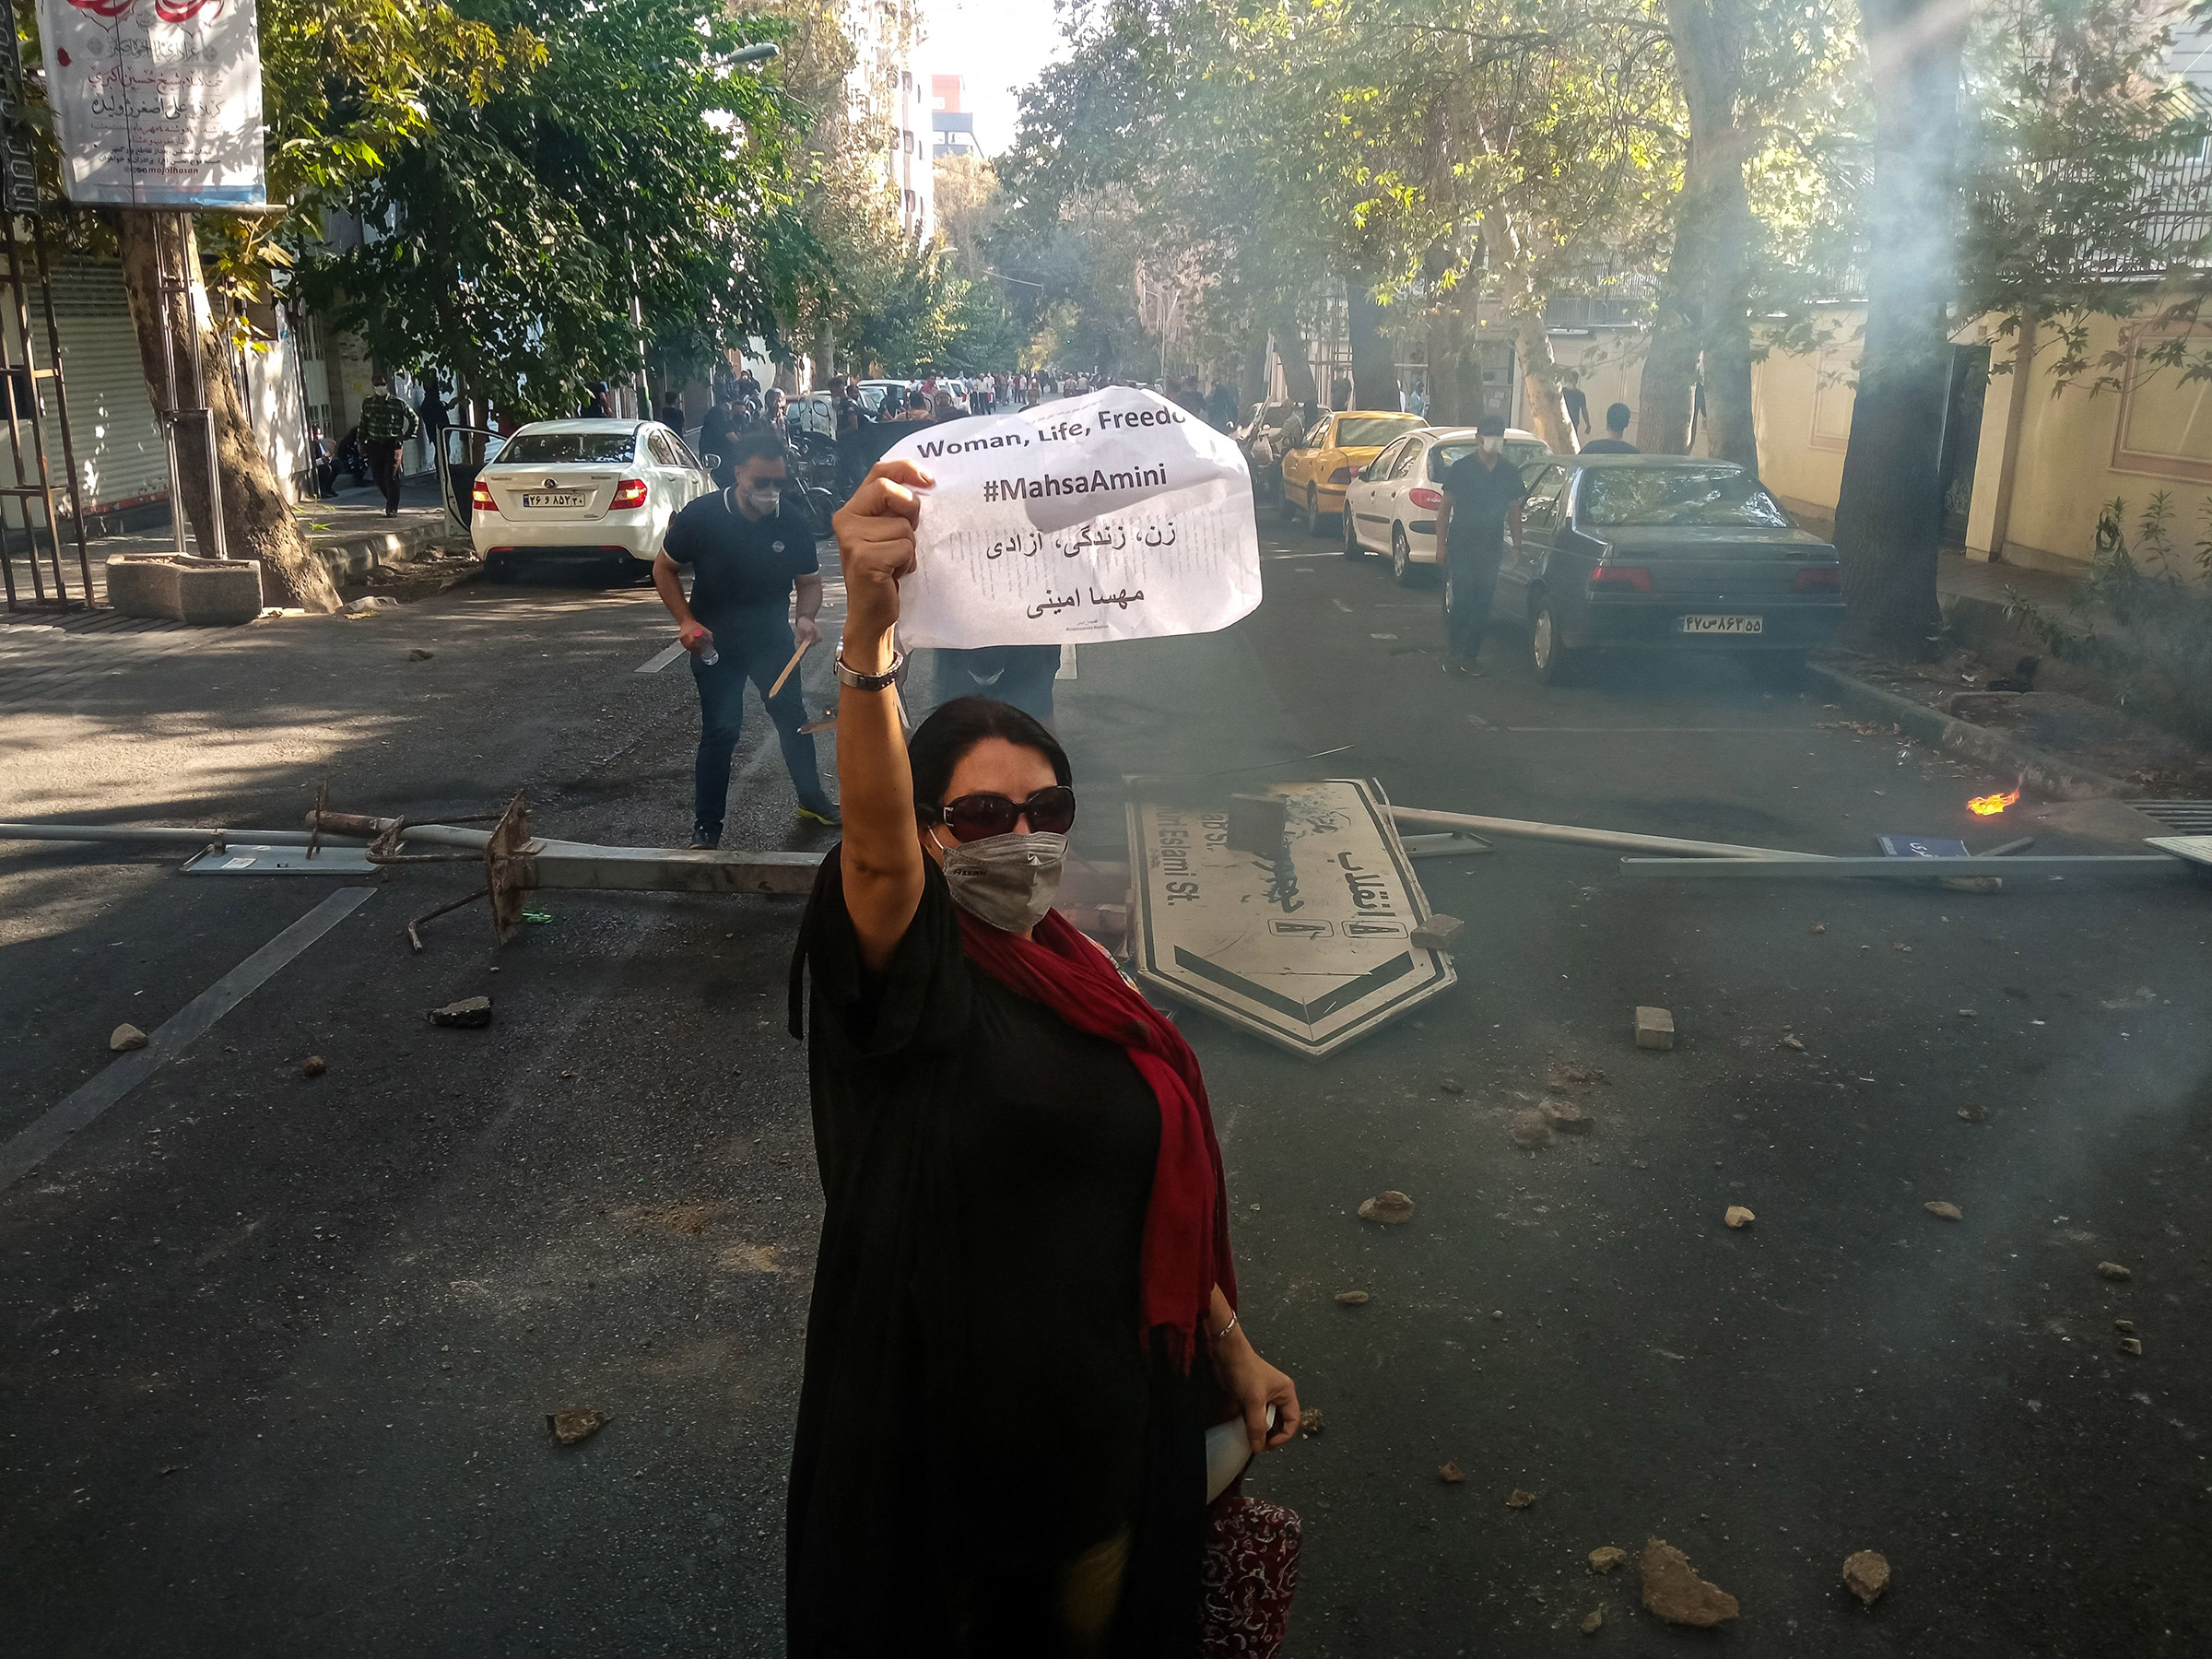 An Iranian woman protester wearing a mask but no hijab holds up a paper reading "Woman, Life, Freedom" and "Mahsa Amini" in front of a street sign on the ground with Revolution and Islamic Republic names on it near Enghelab (Revolution) Street in Tehran, on Oct. 1, 2022. (Anonymous/Middle East Images/AFP/Getty Images)